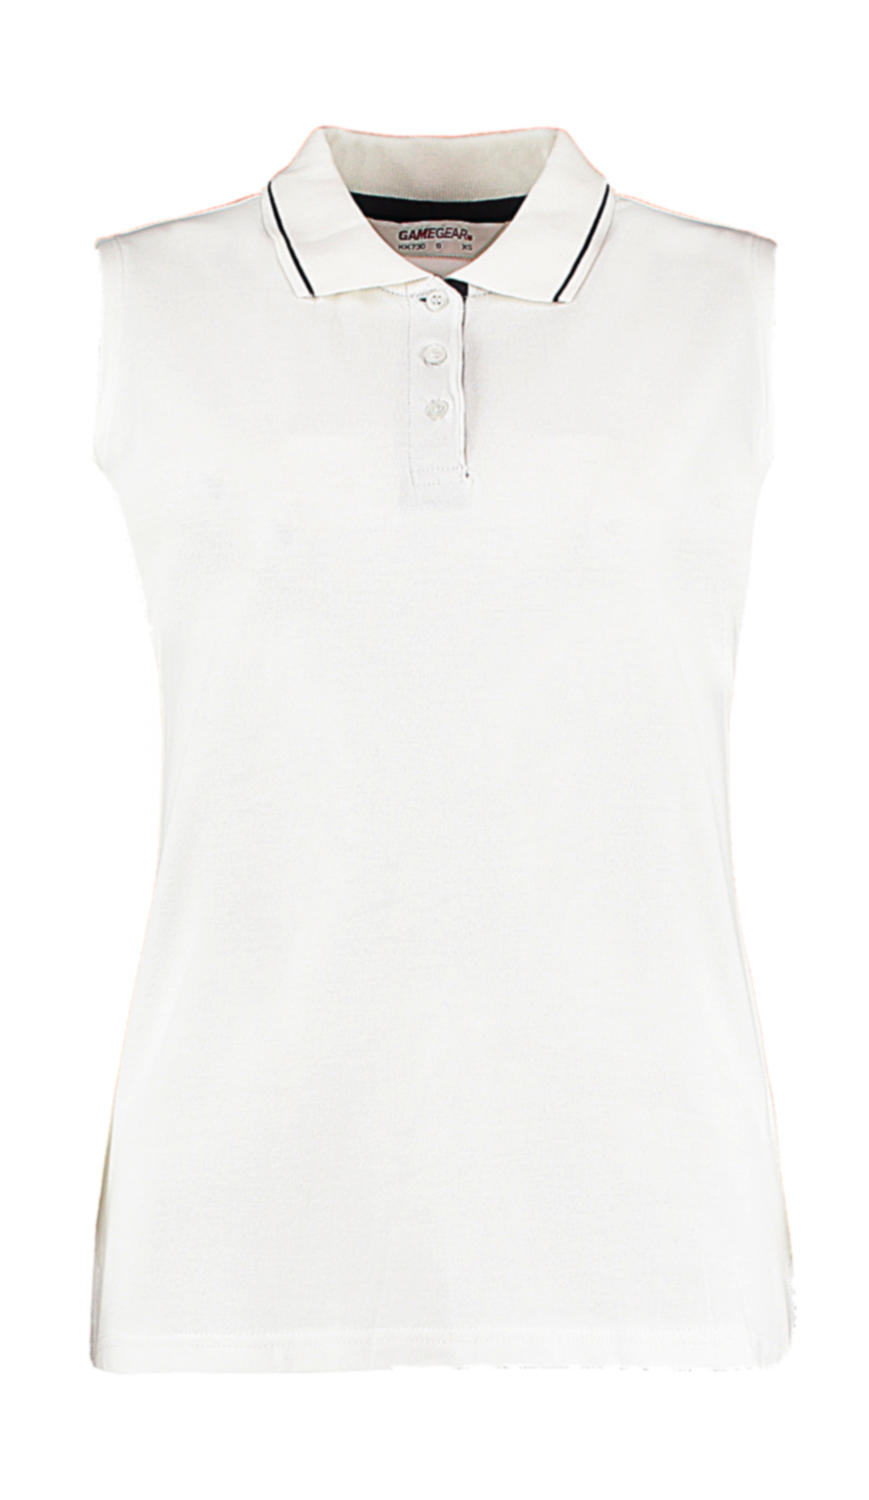  Womens Classic Fit Sleeveless Polo in Farbe White/Navy